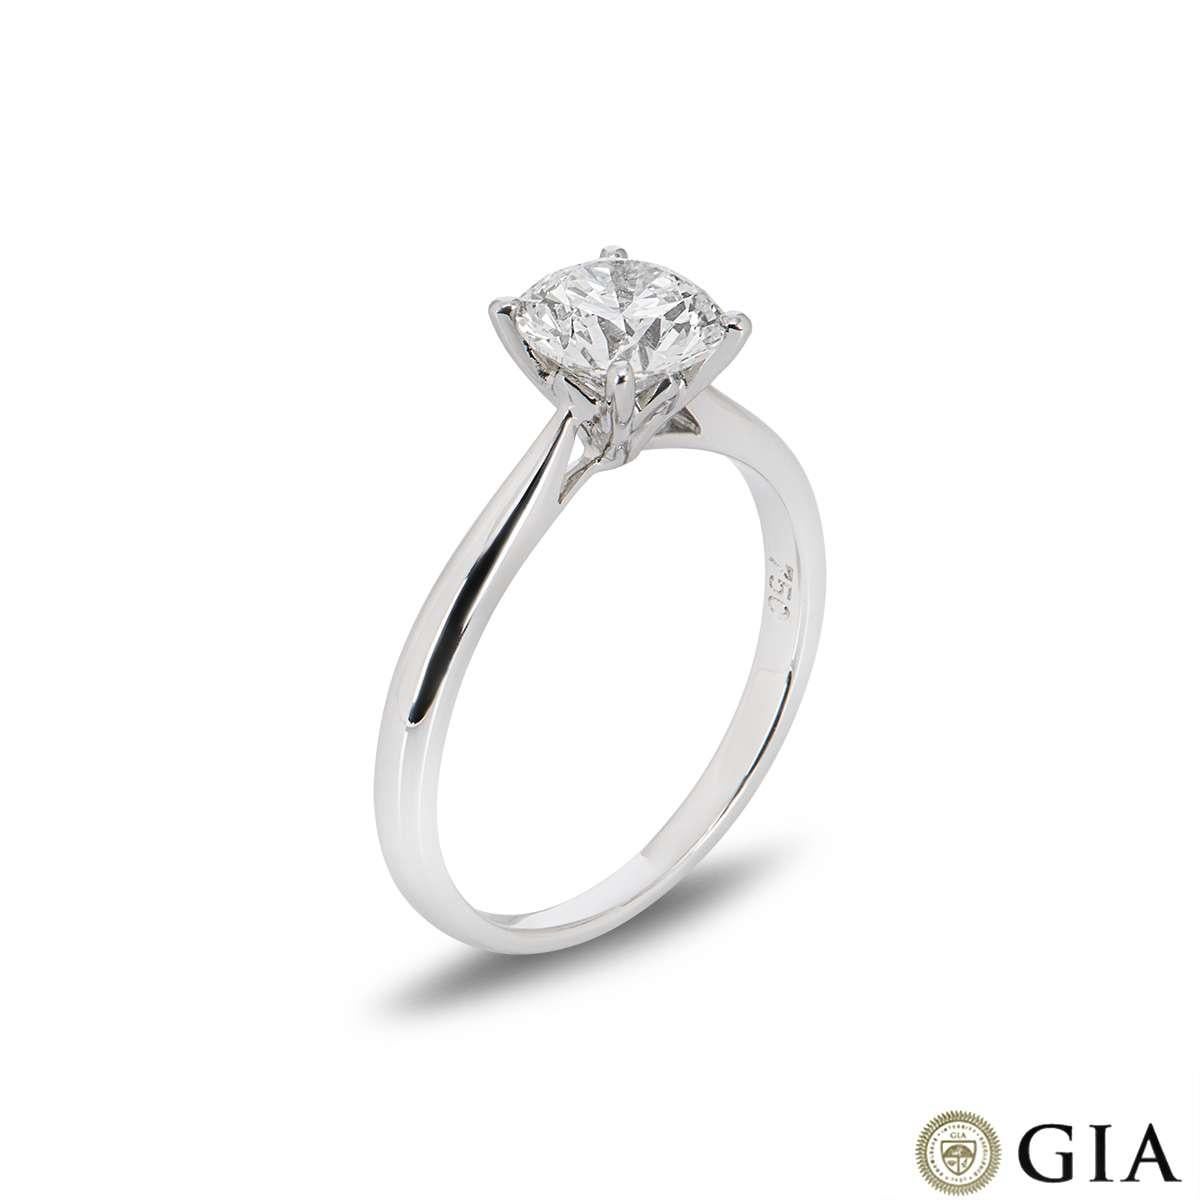 A beautiful 18k white gold diamond single stone ring. The ring is set to the centre with a 1.15ct round brilliant cut diamond, F in colour and VS1 in clarity in a classic four claw setting. The diamond scores an excellent rating in all three aspects